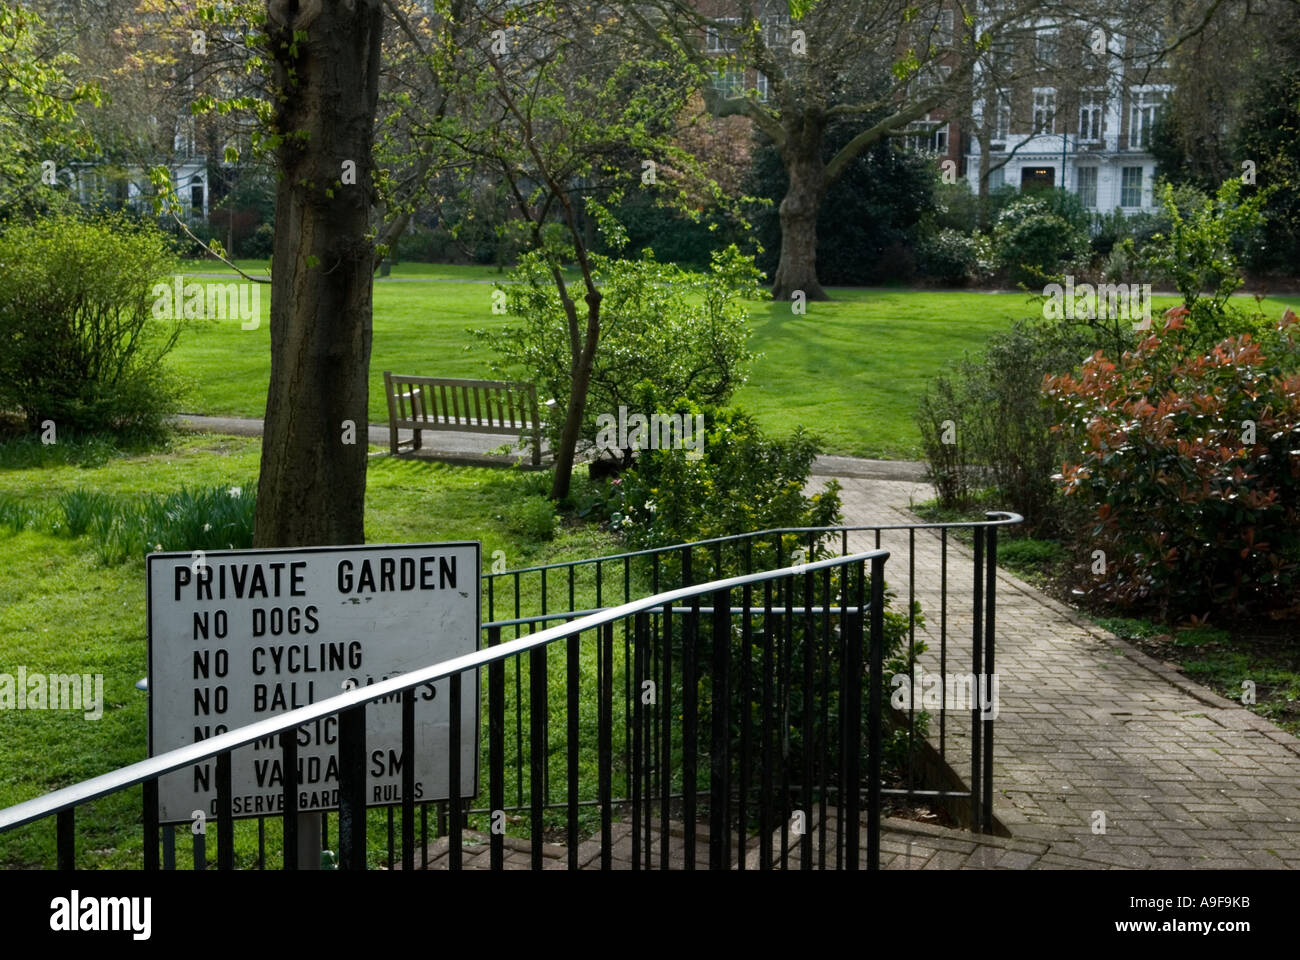 The Royal Borough of Kensington and Chelsea. Private residents gardens. Cadogan Place, London SW1 England. Stock Photo